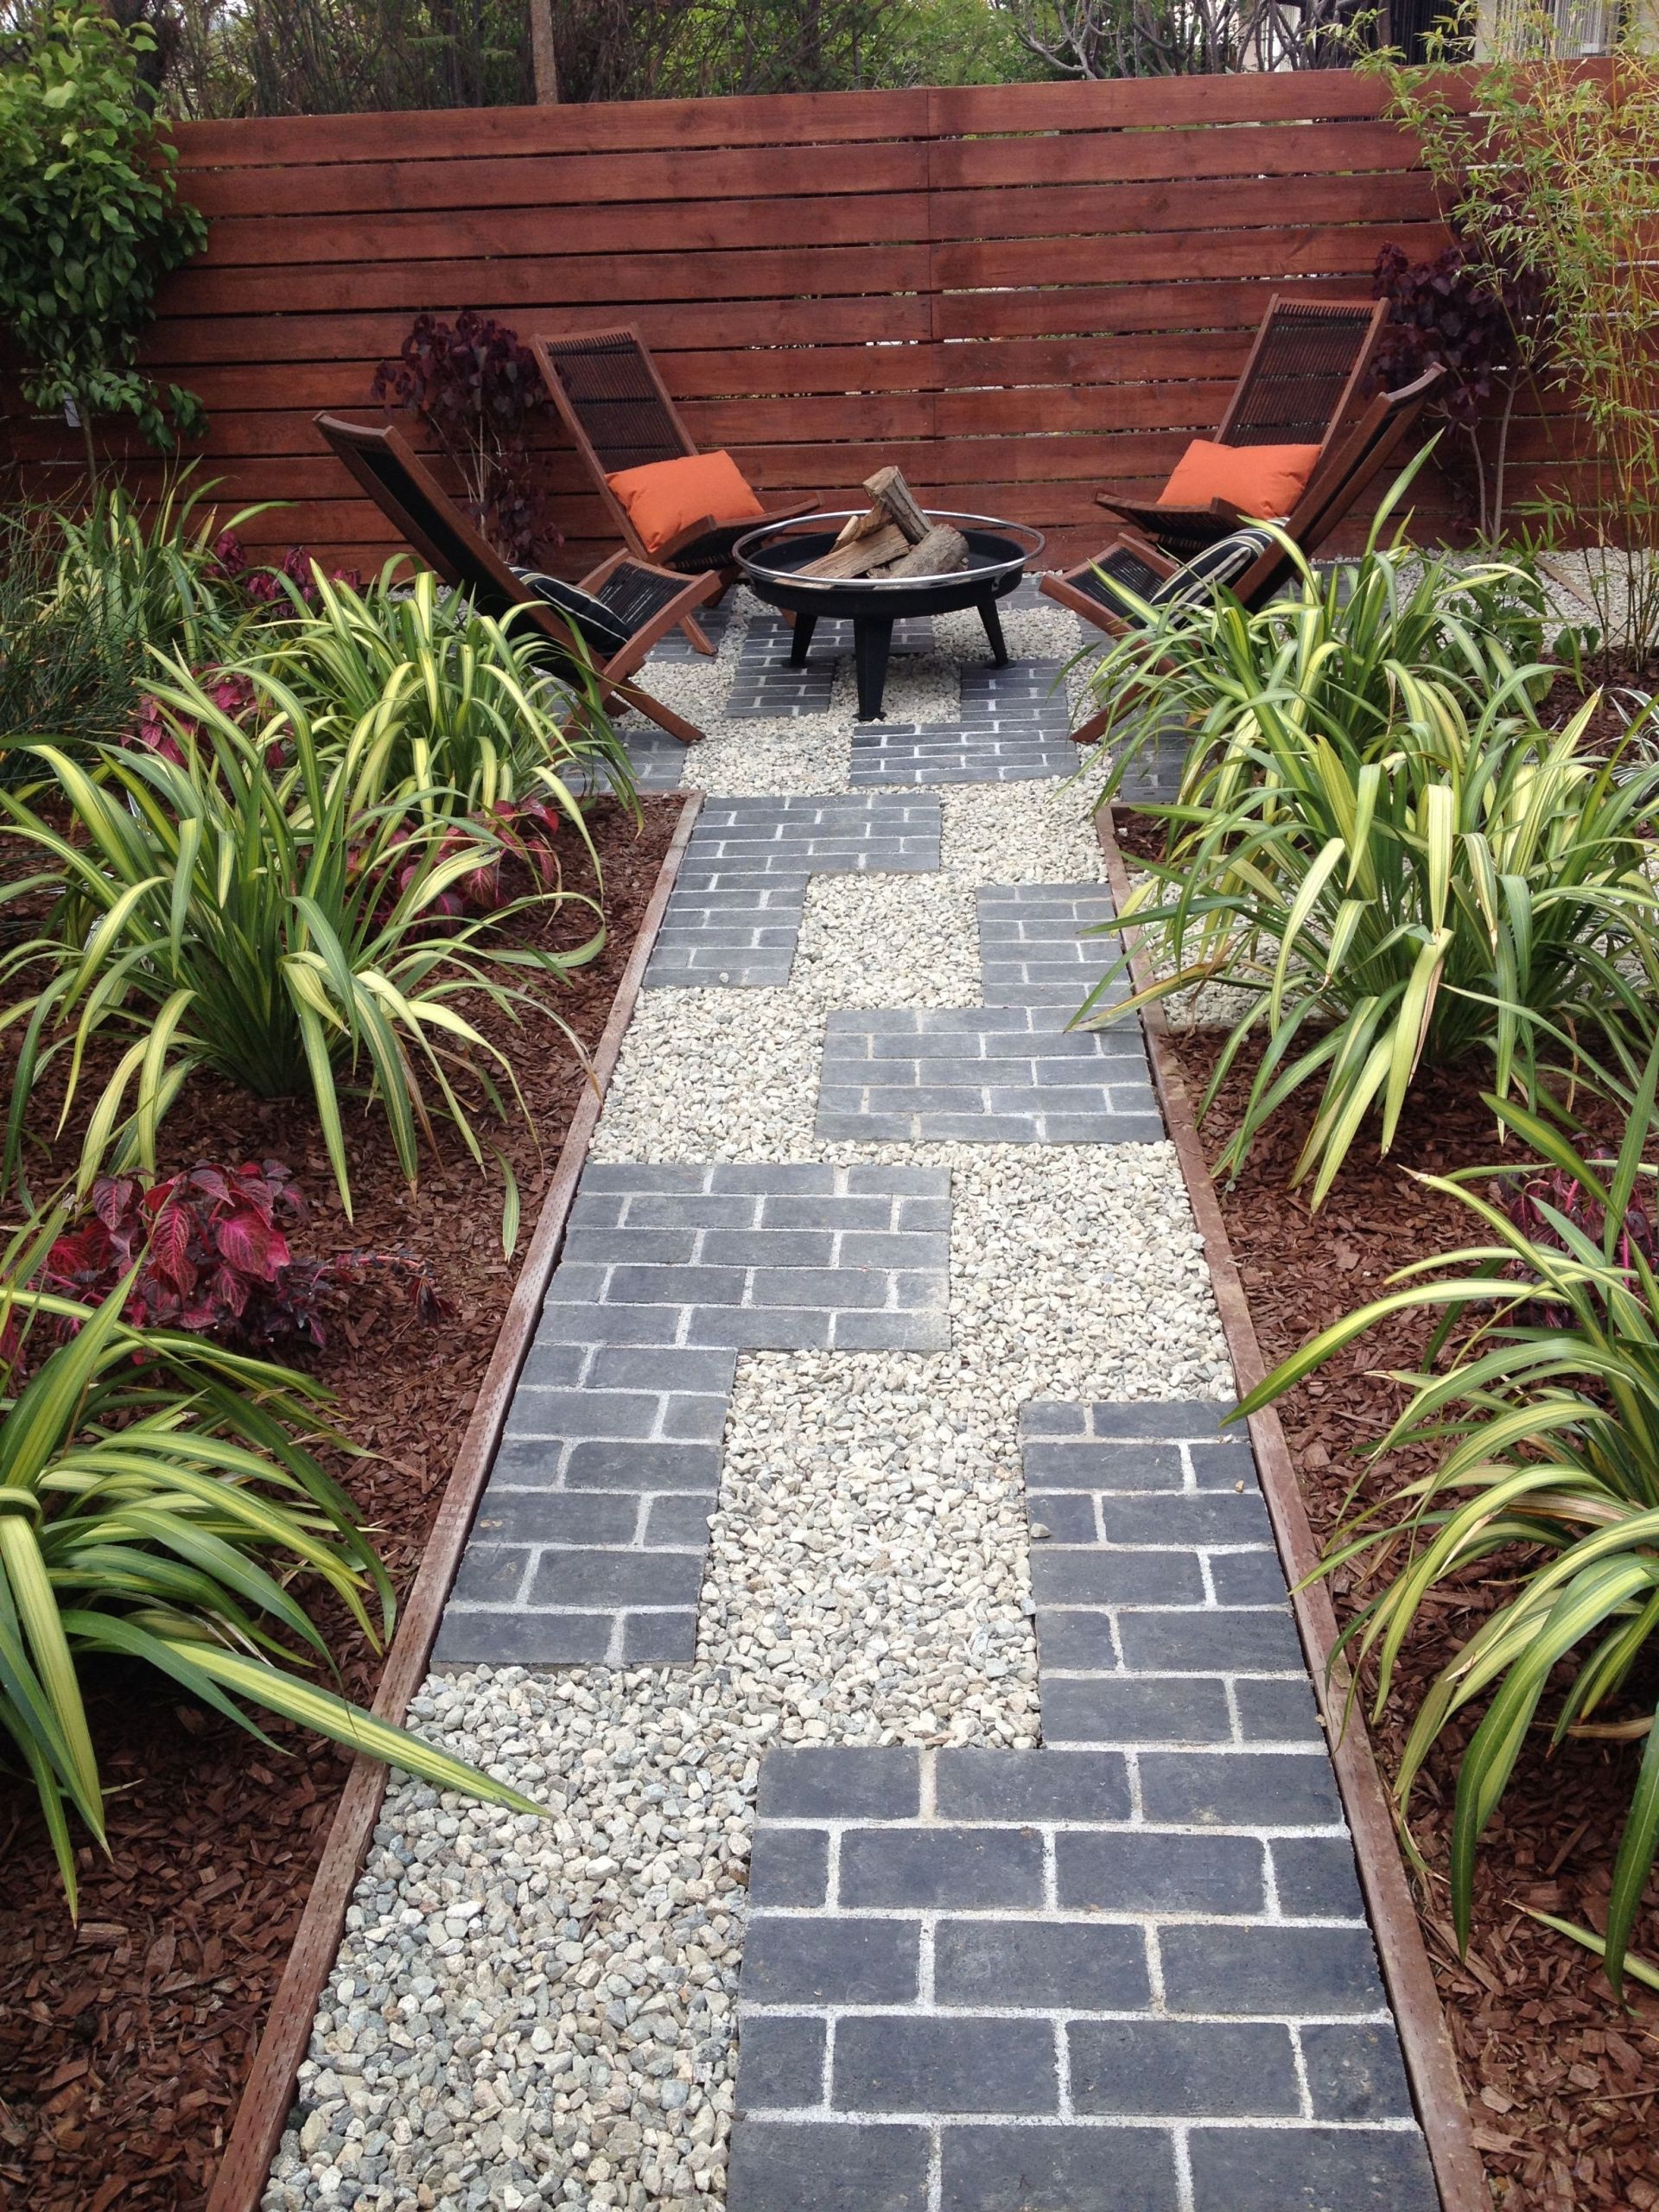 Wood Landscape Edging
 Tetris inspired pathway with grey brick and gravel